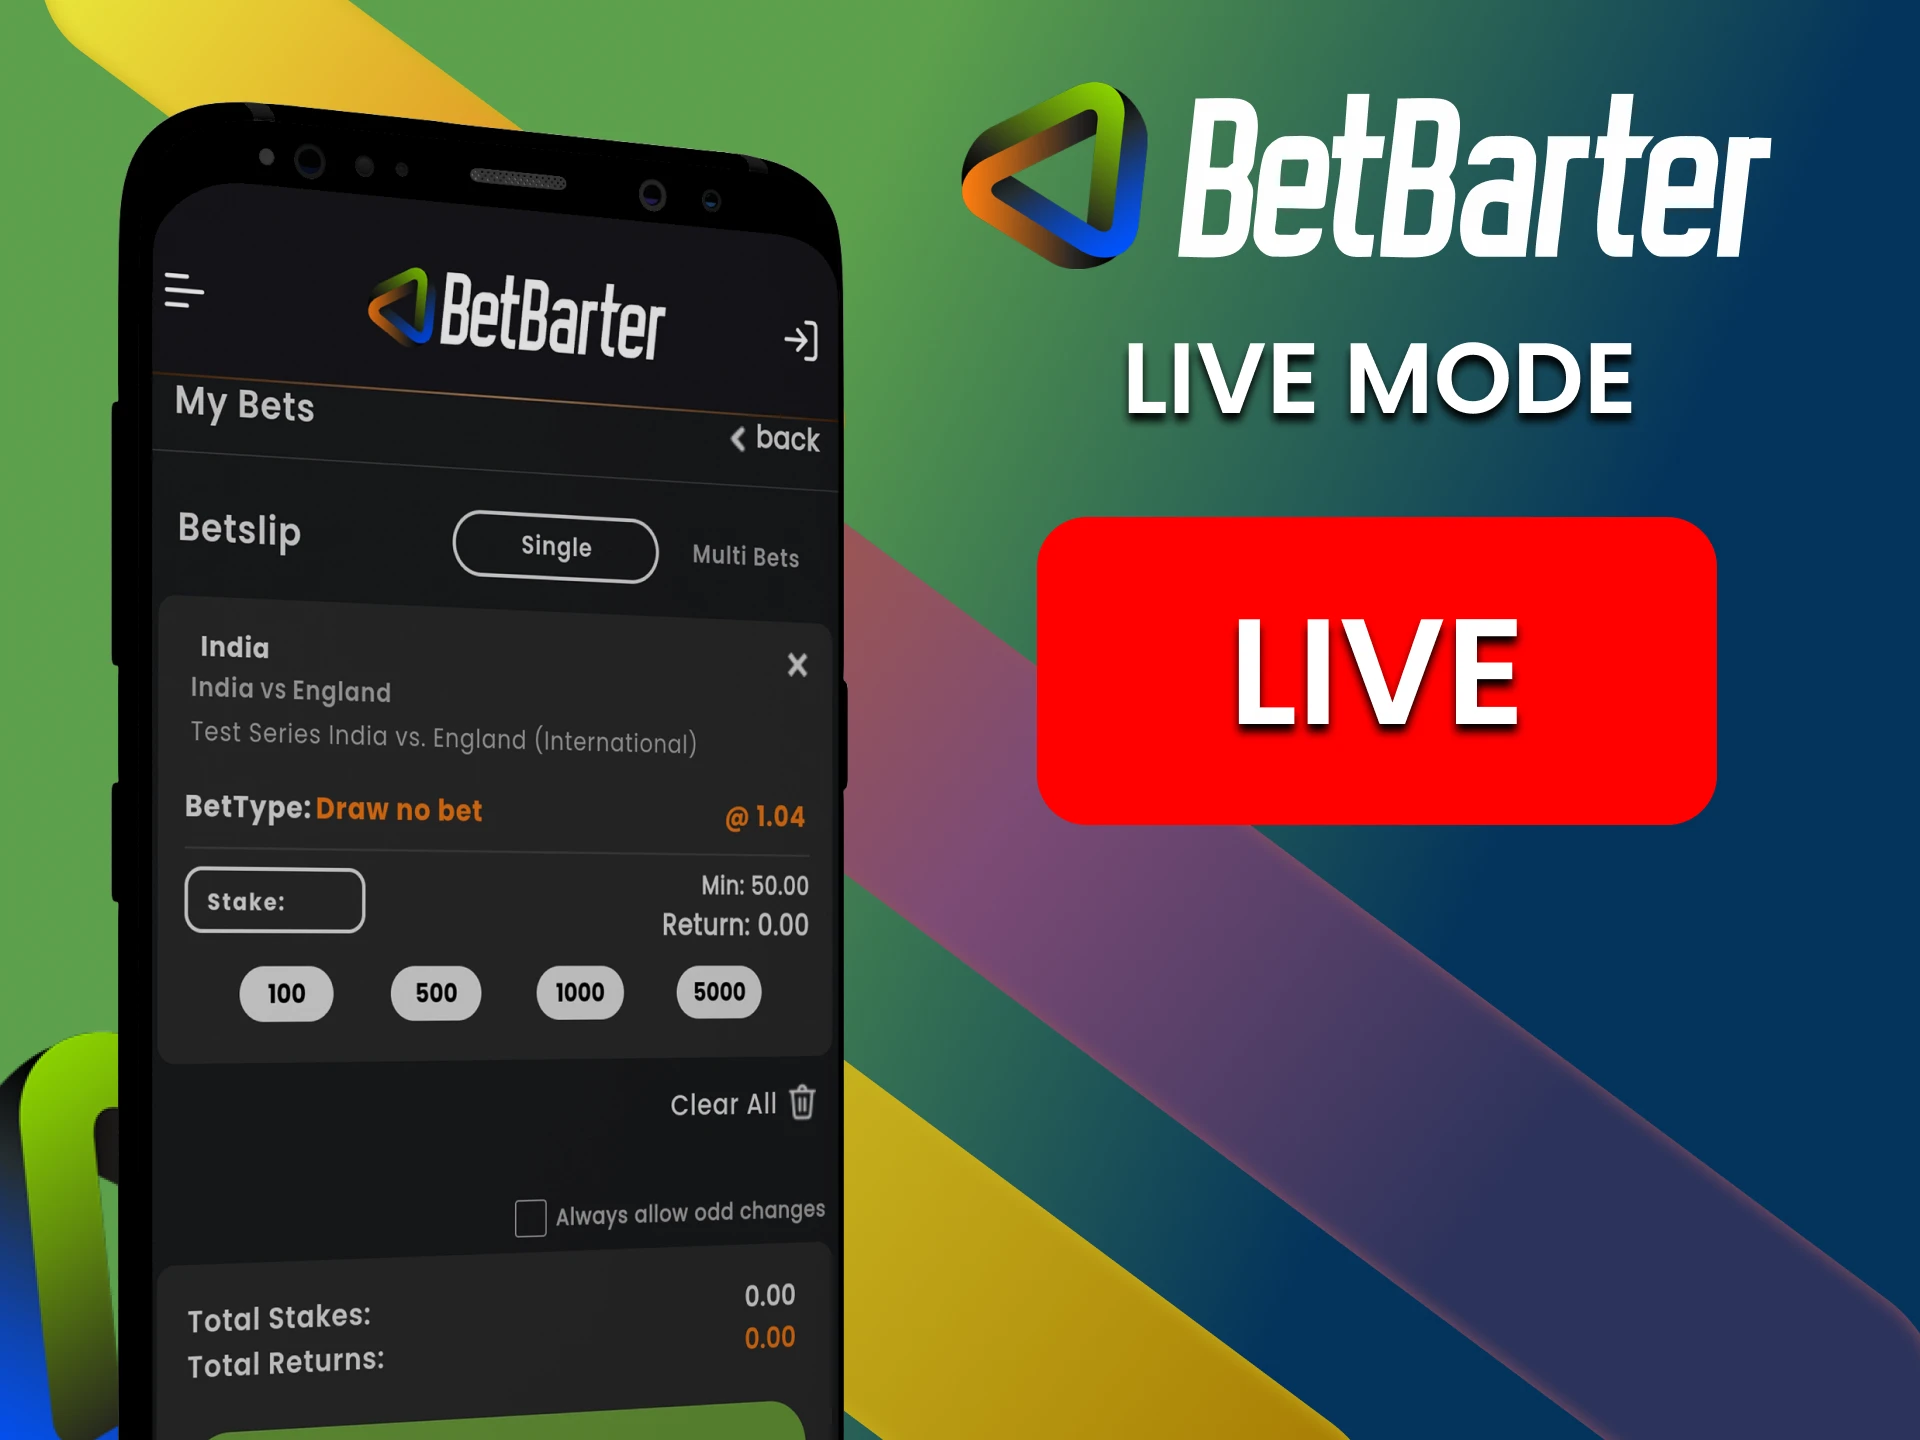 Enjoy live event broadcasts directly on the BetBarter app while placing bets during the match.